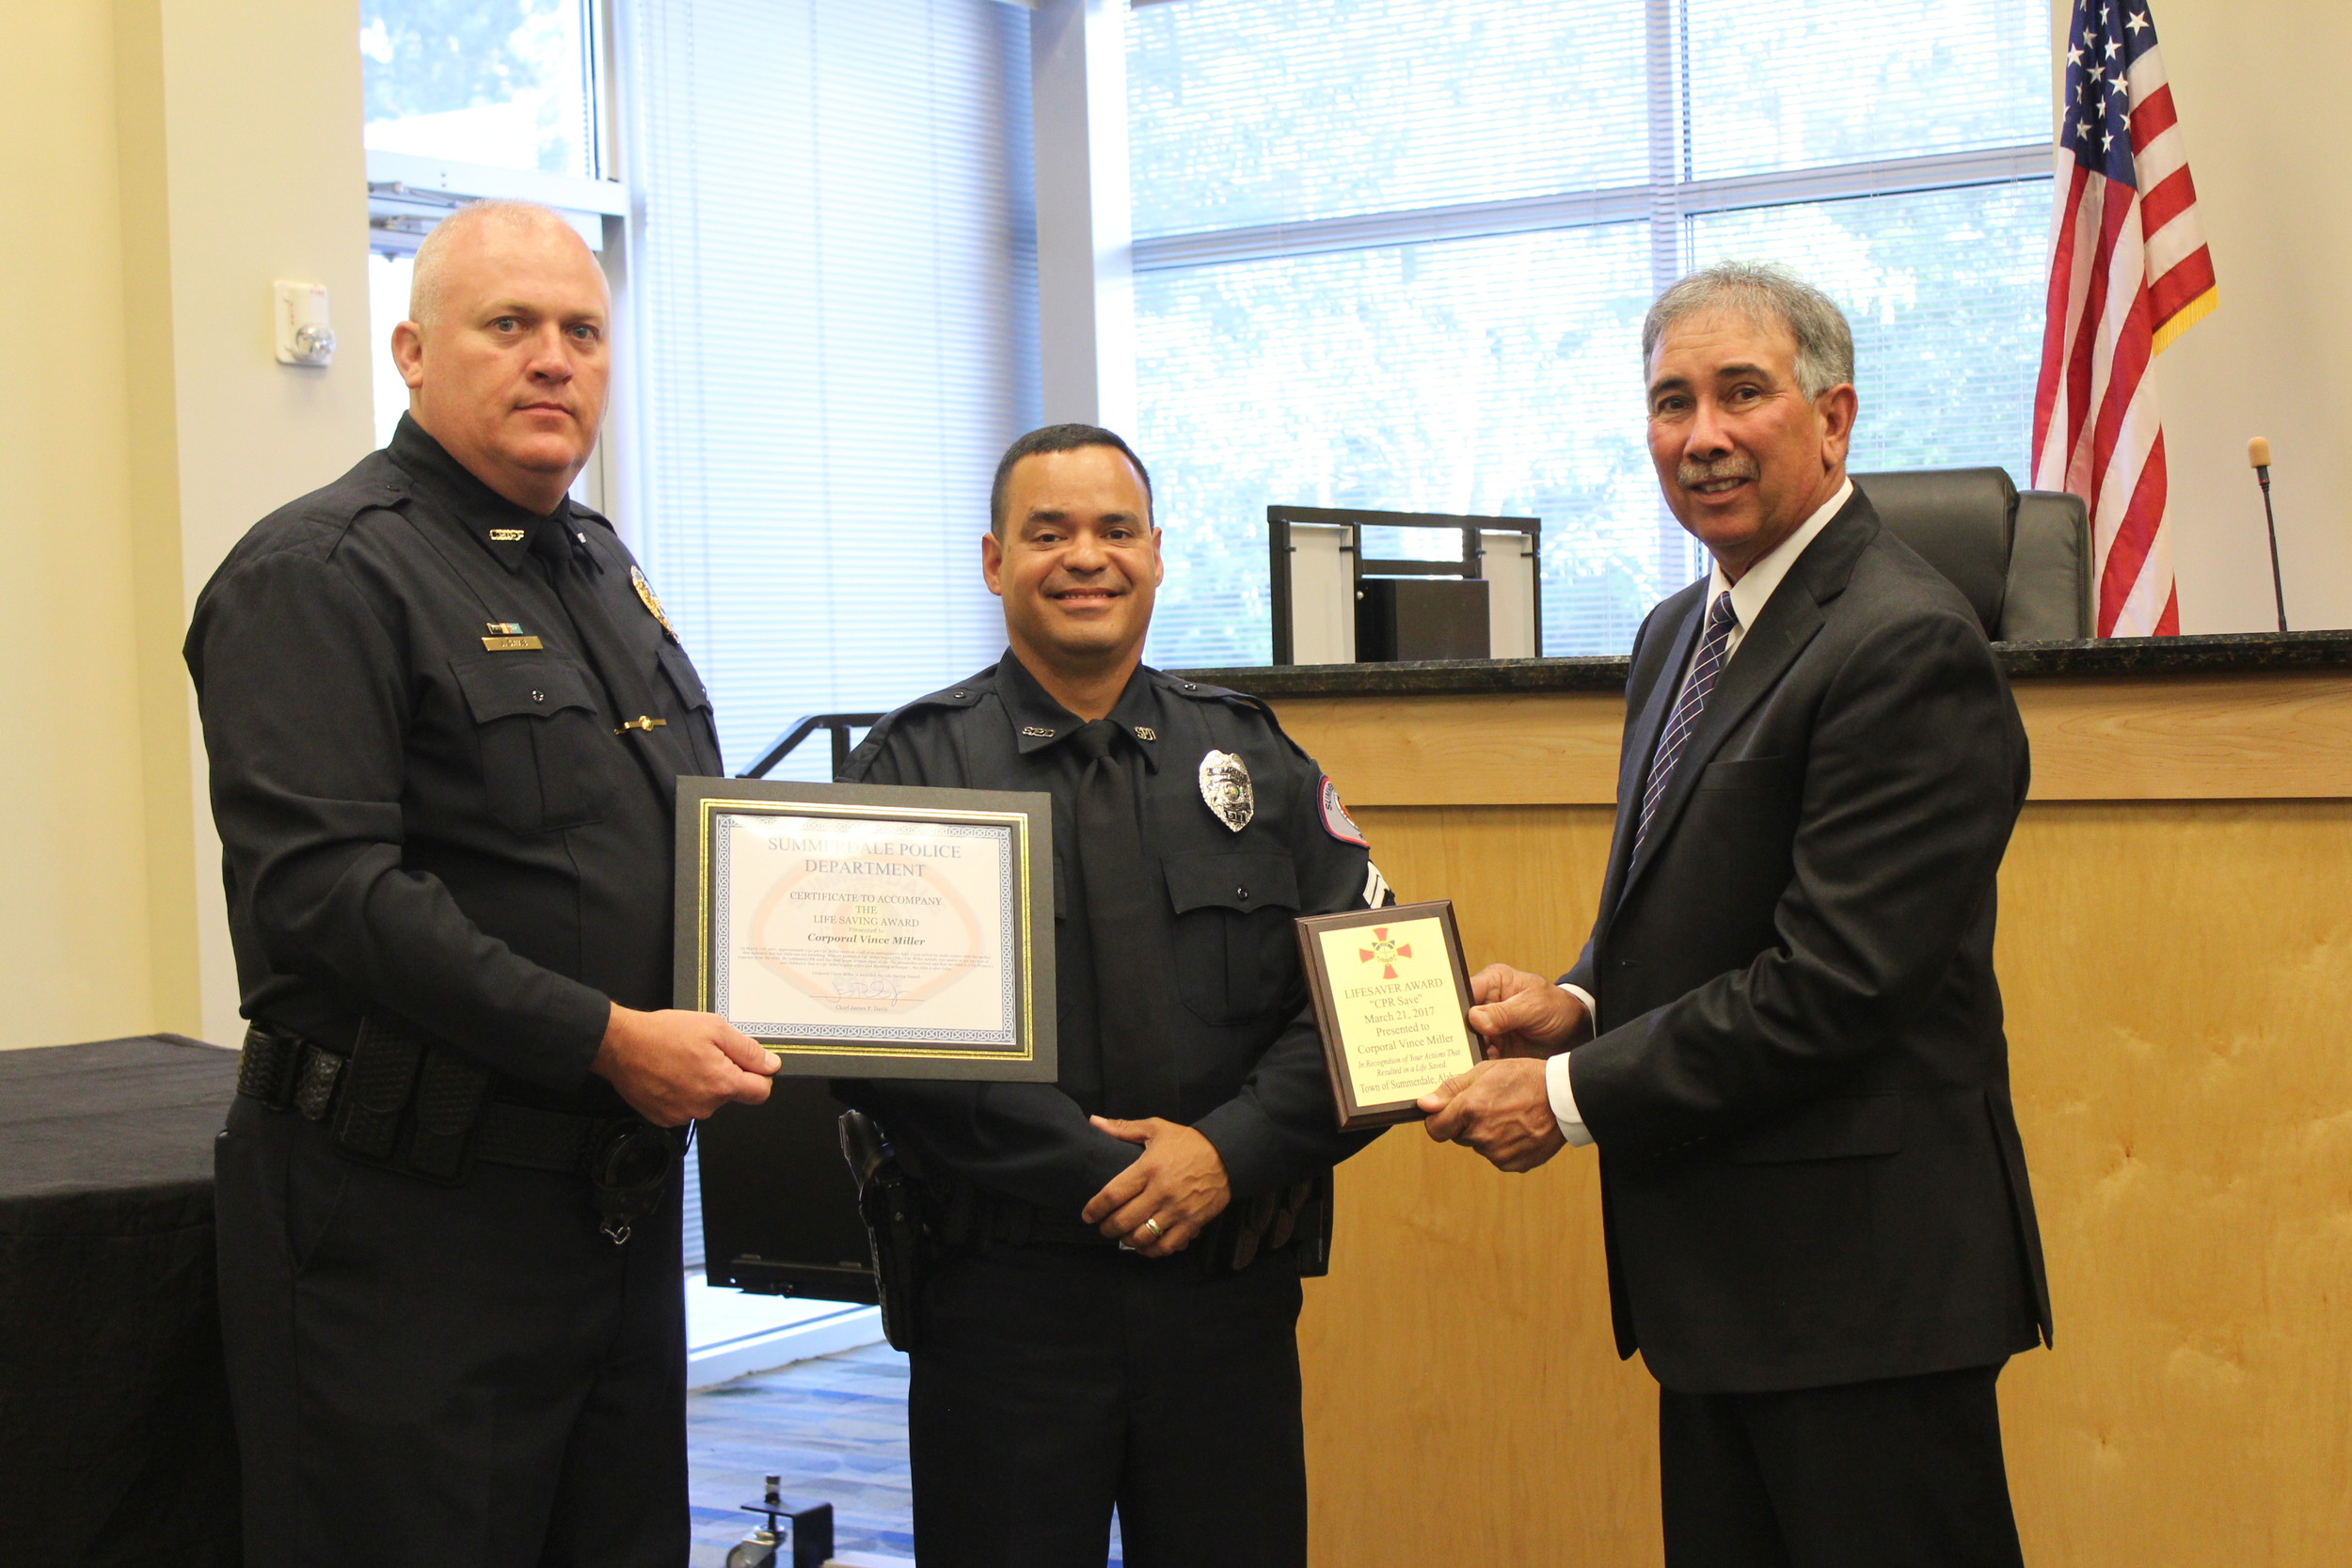 Cpl. Vince Miller with the Summerdale Police Department received one of three lifesaving awards at the Summerdale Town Council meeting on April 10.